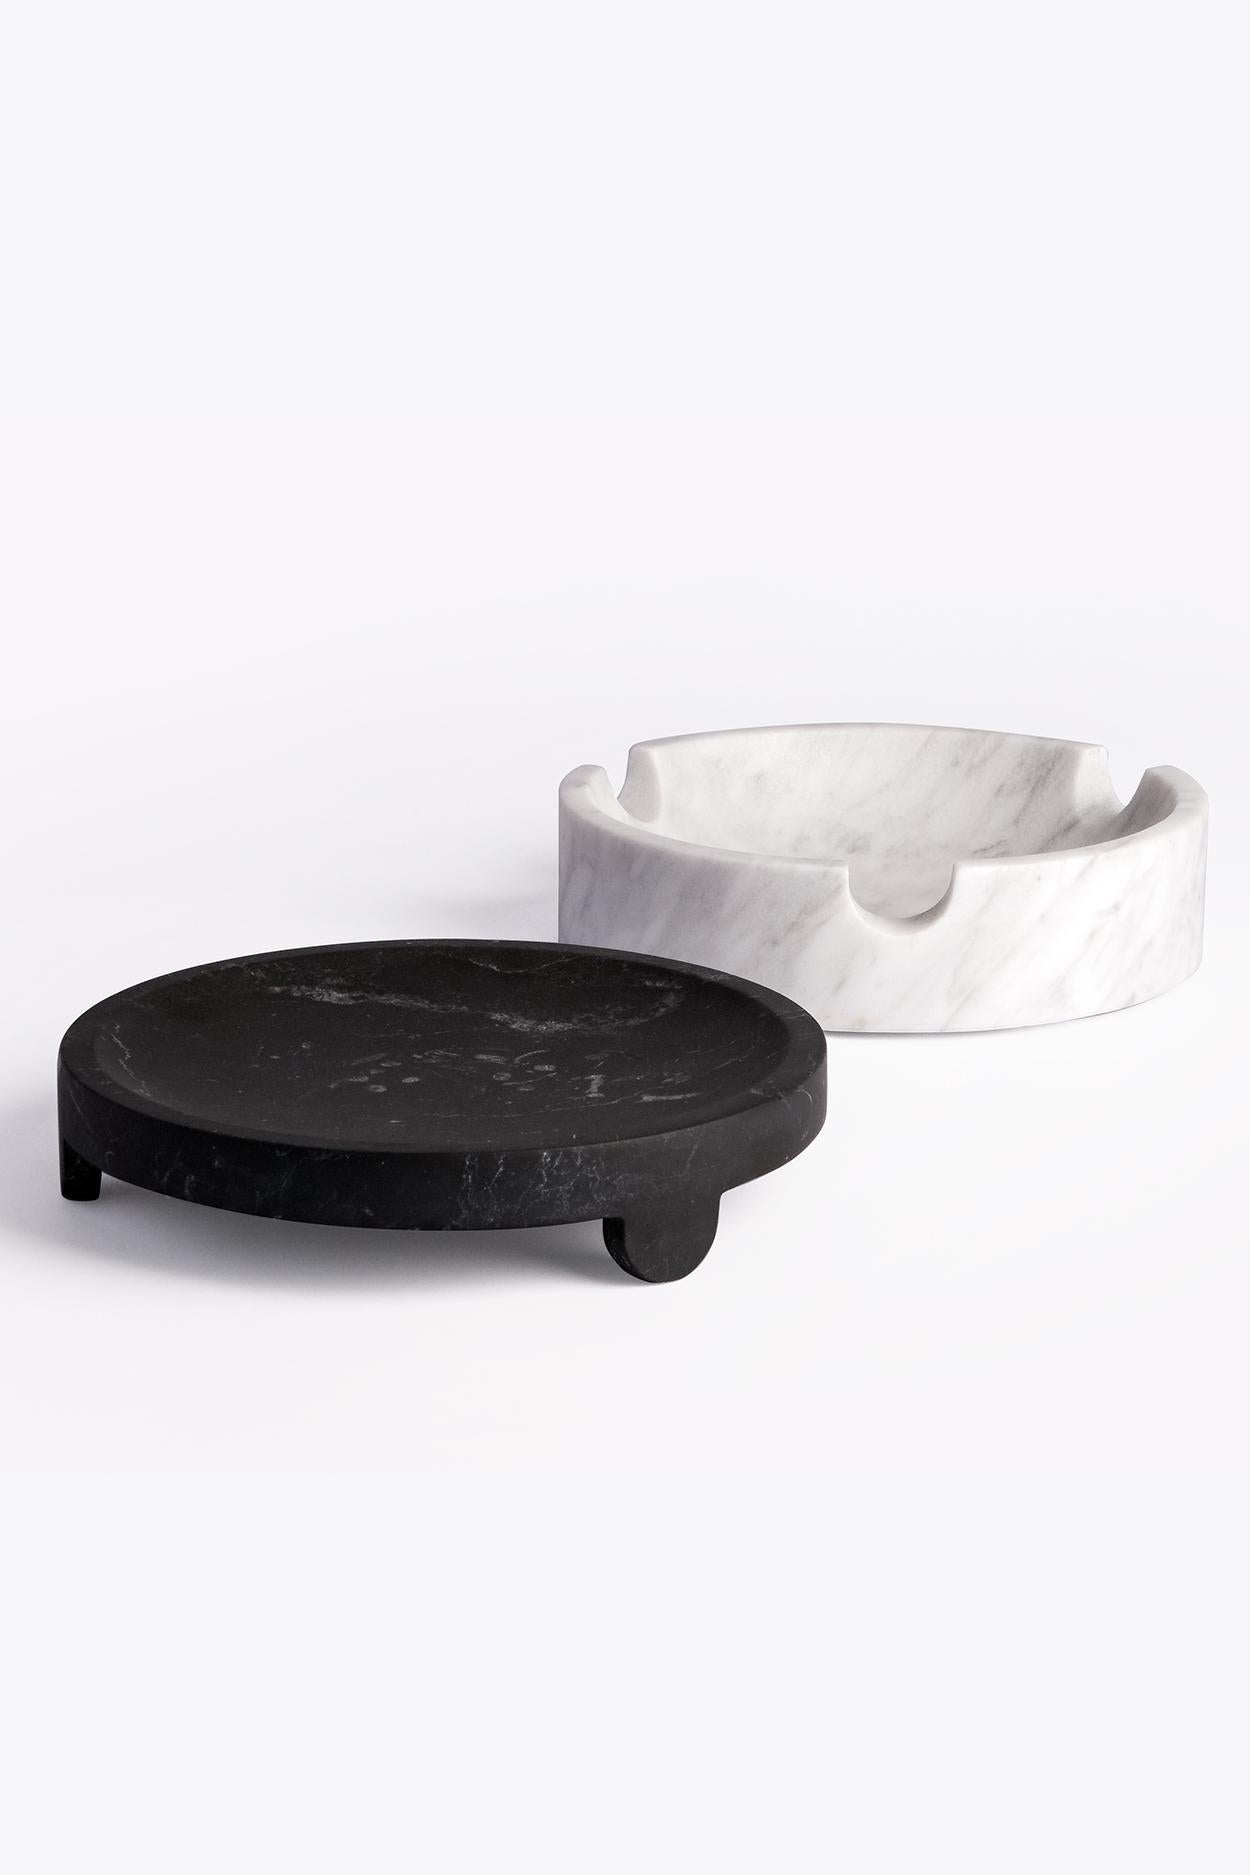 An oppositions where the humility of the ashes gives way to the preciousness of the objects to enclose.
A box with joints which provides a different function: an ashtray becomes a treasure chest. This elegant round box is composed of two pieces -